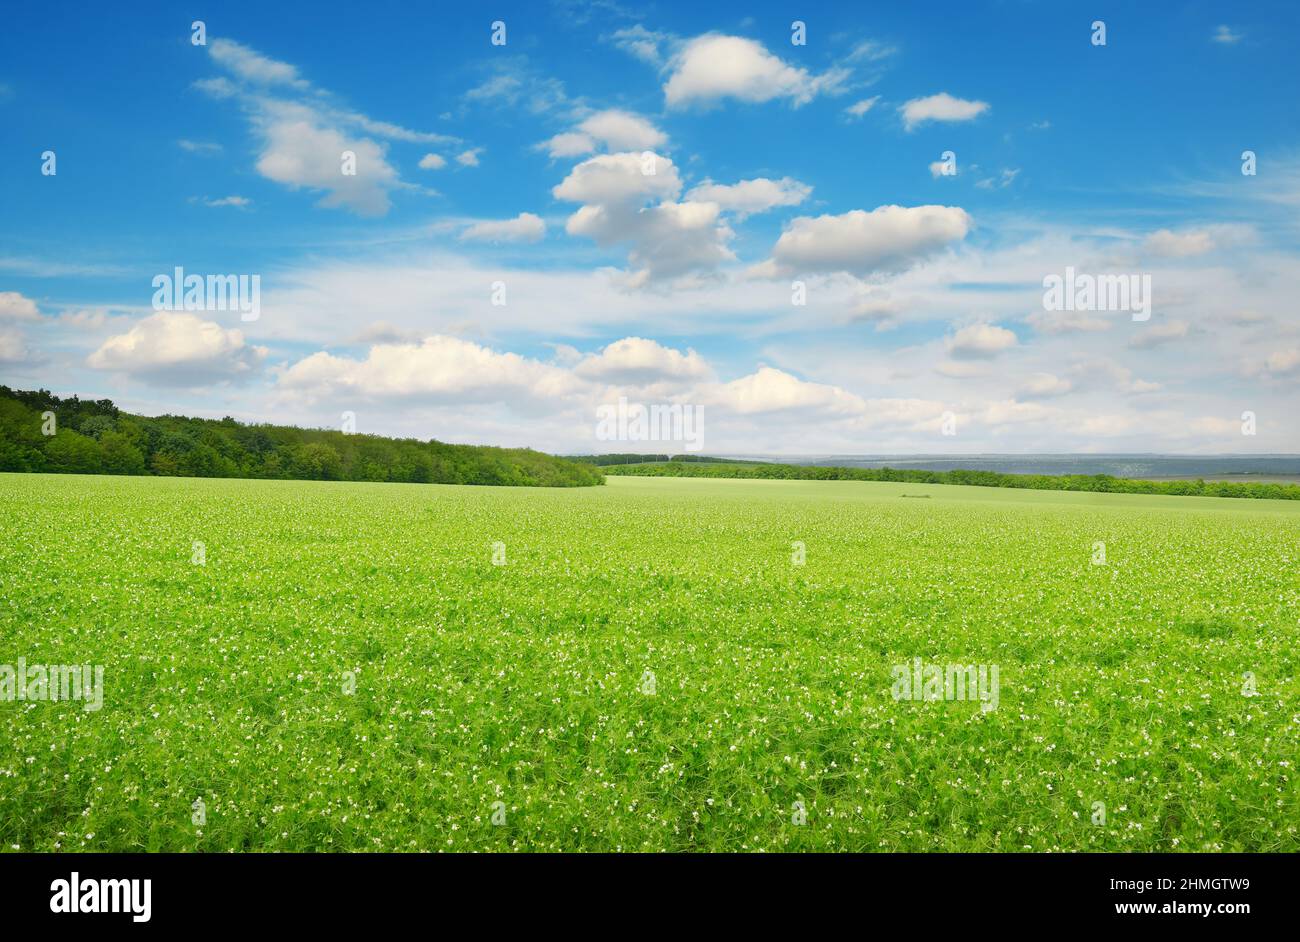 Rectangular landscape with green pea field and blue sky. Stock Photo